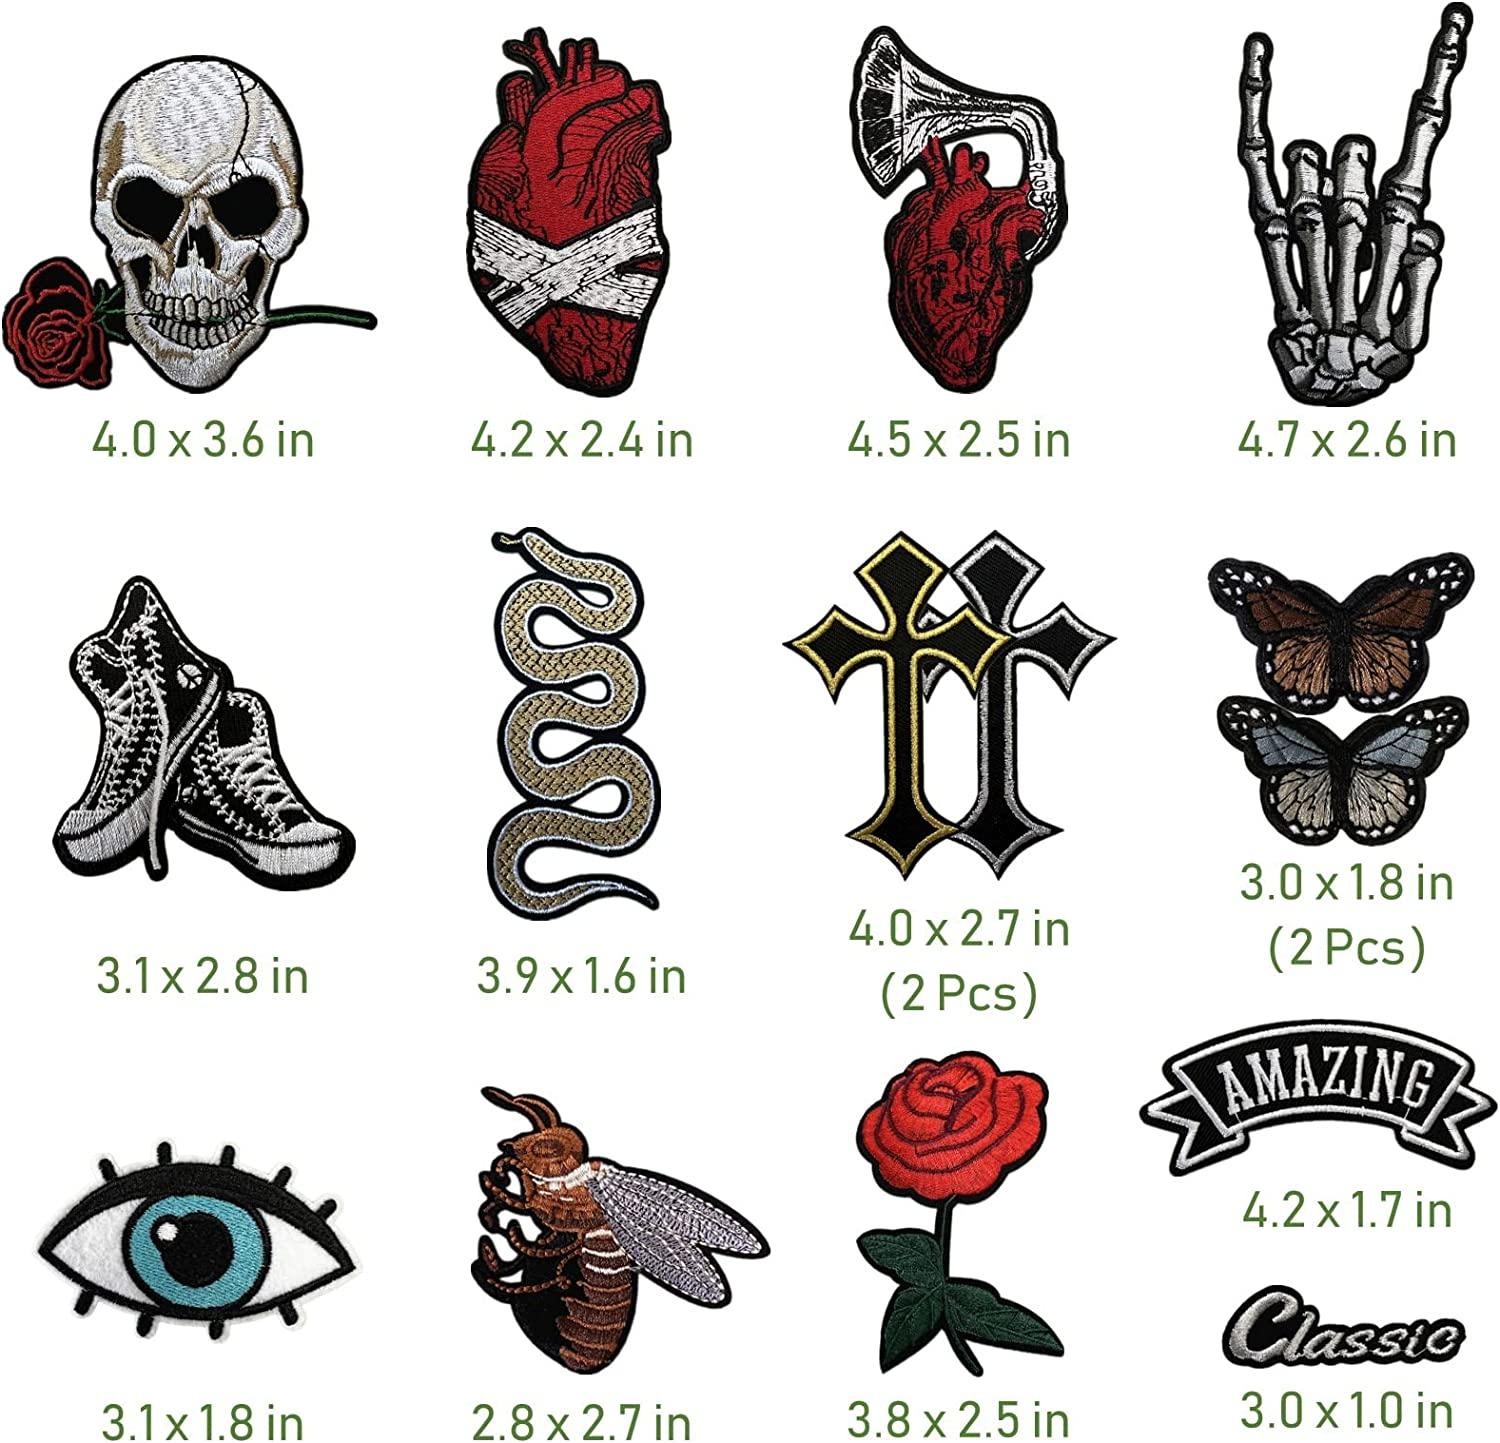 Dark Embroidered Applique Iron On Patches for Backpacks, Rock Band Patches  for Jackets, Cool Sew Patch for Clothing, Jeans, Hats, DIY Accessories